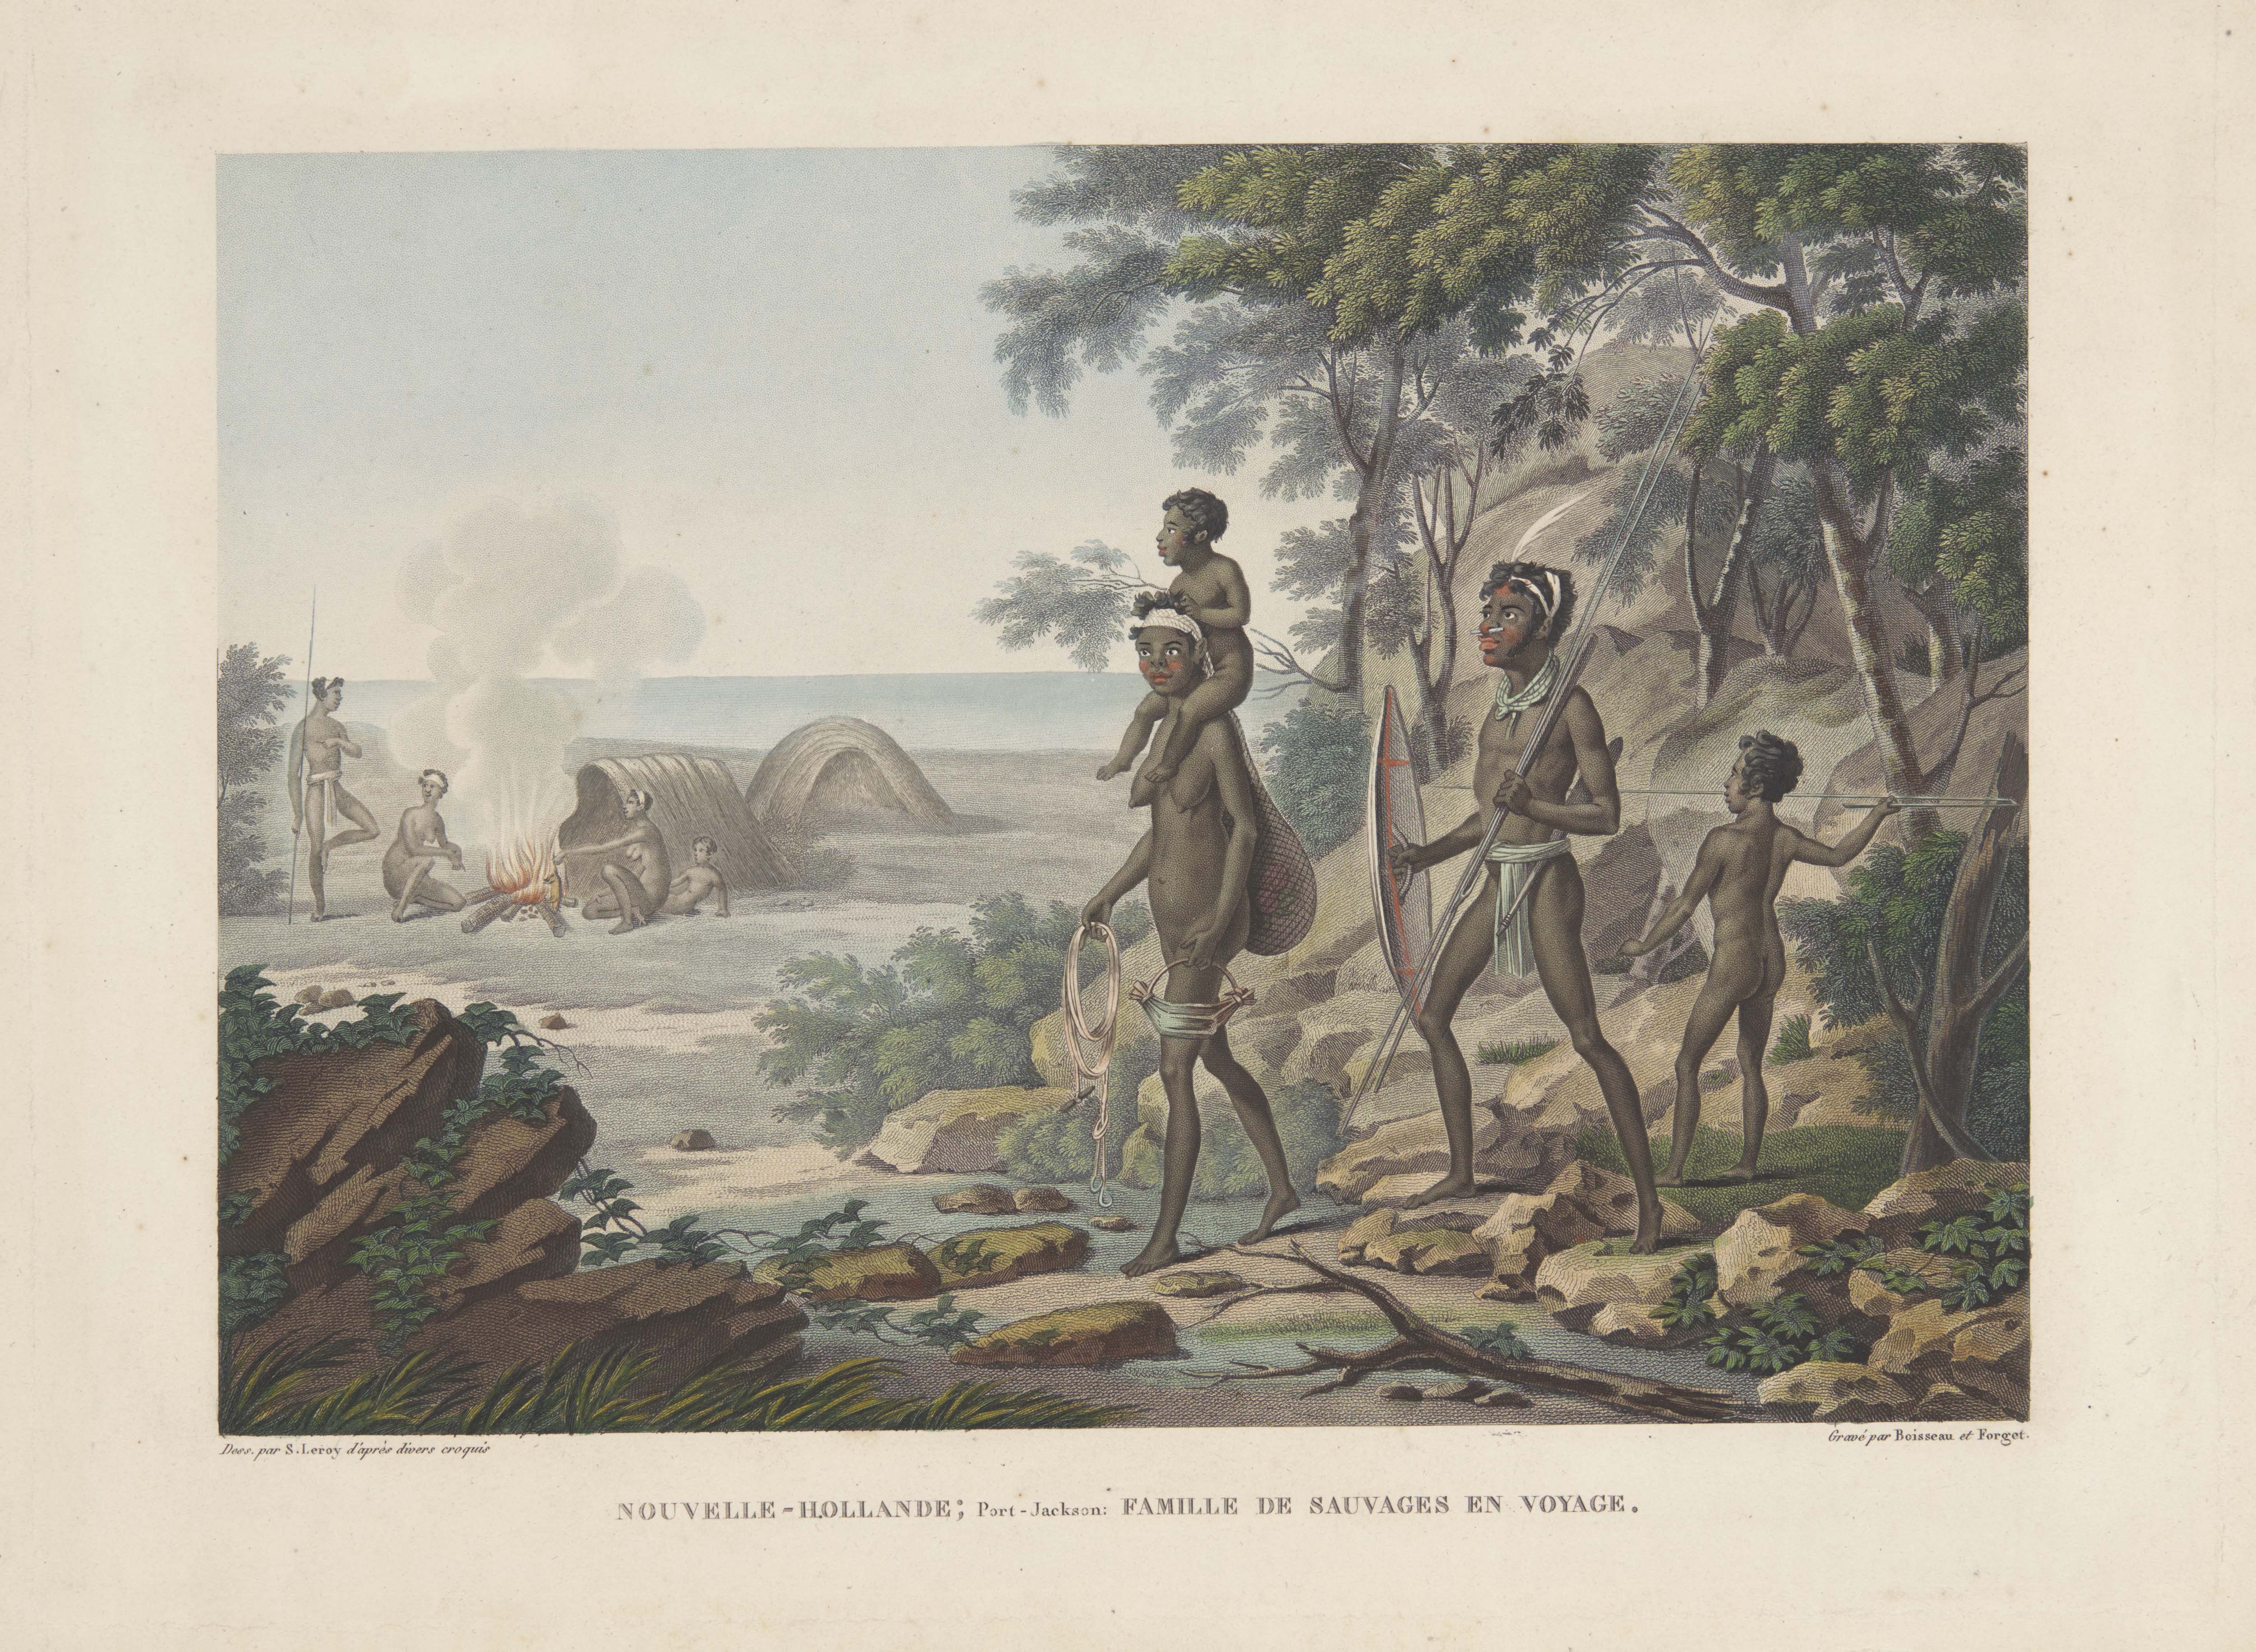 A colour engraving of a family of four travelling in the Port Jackson area